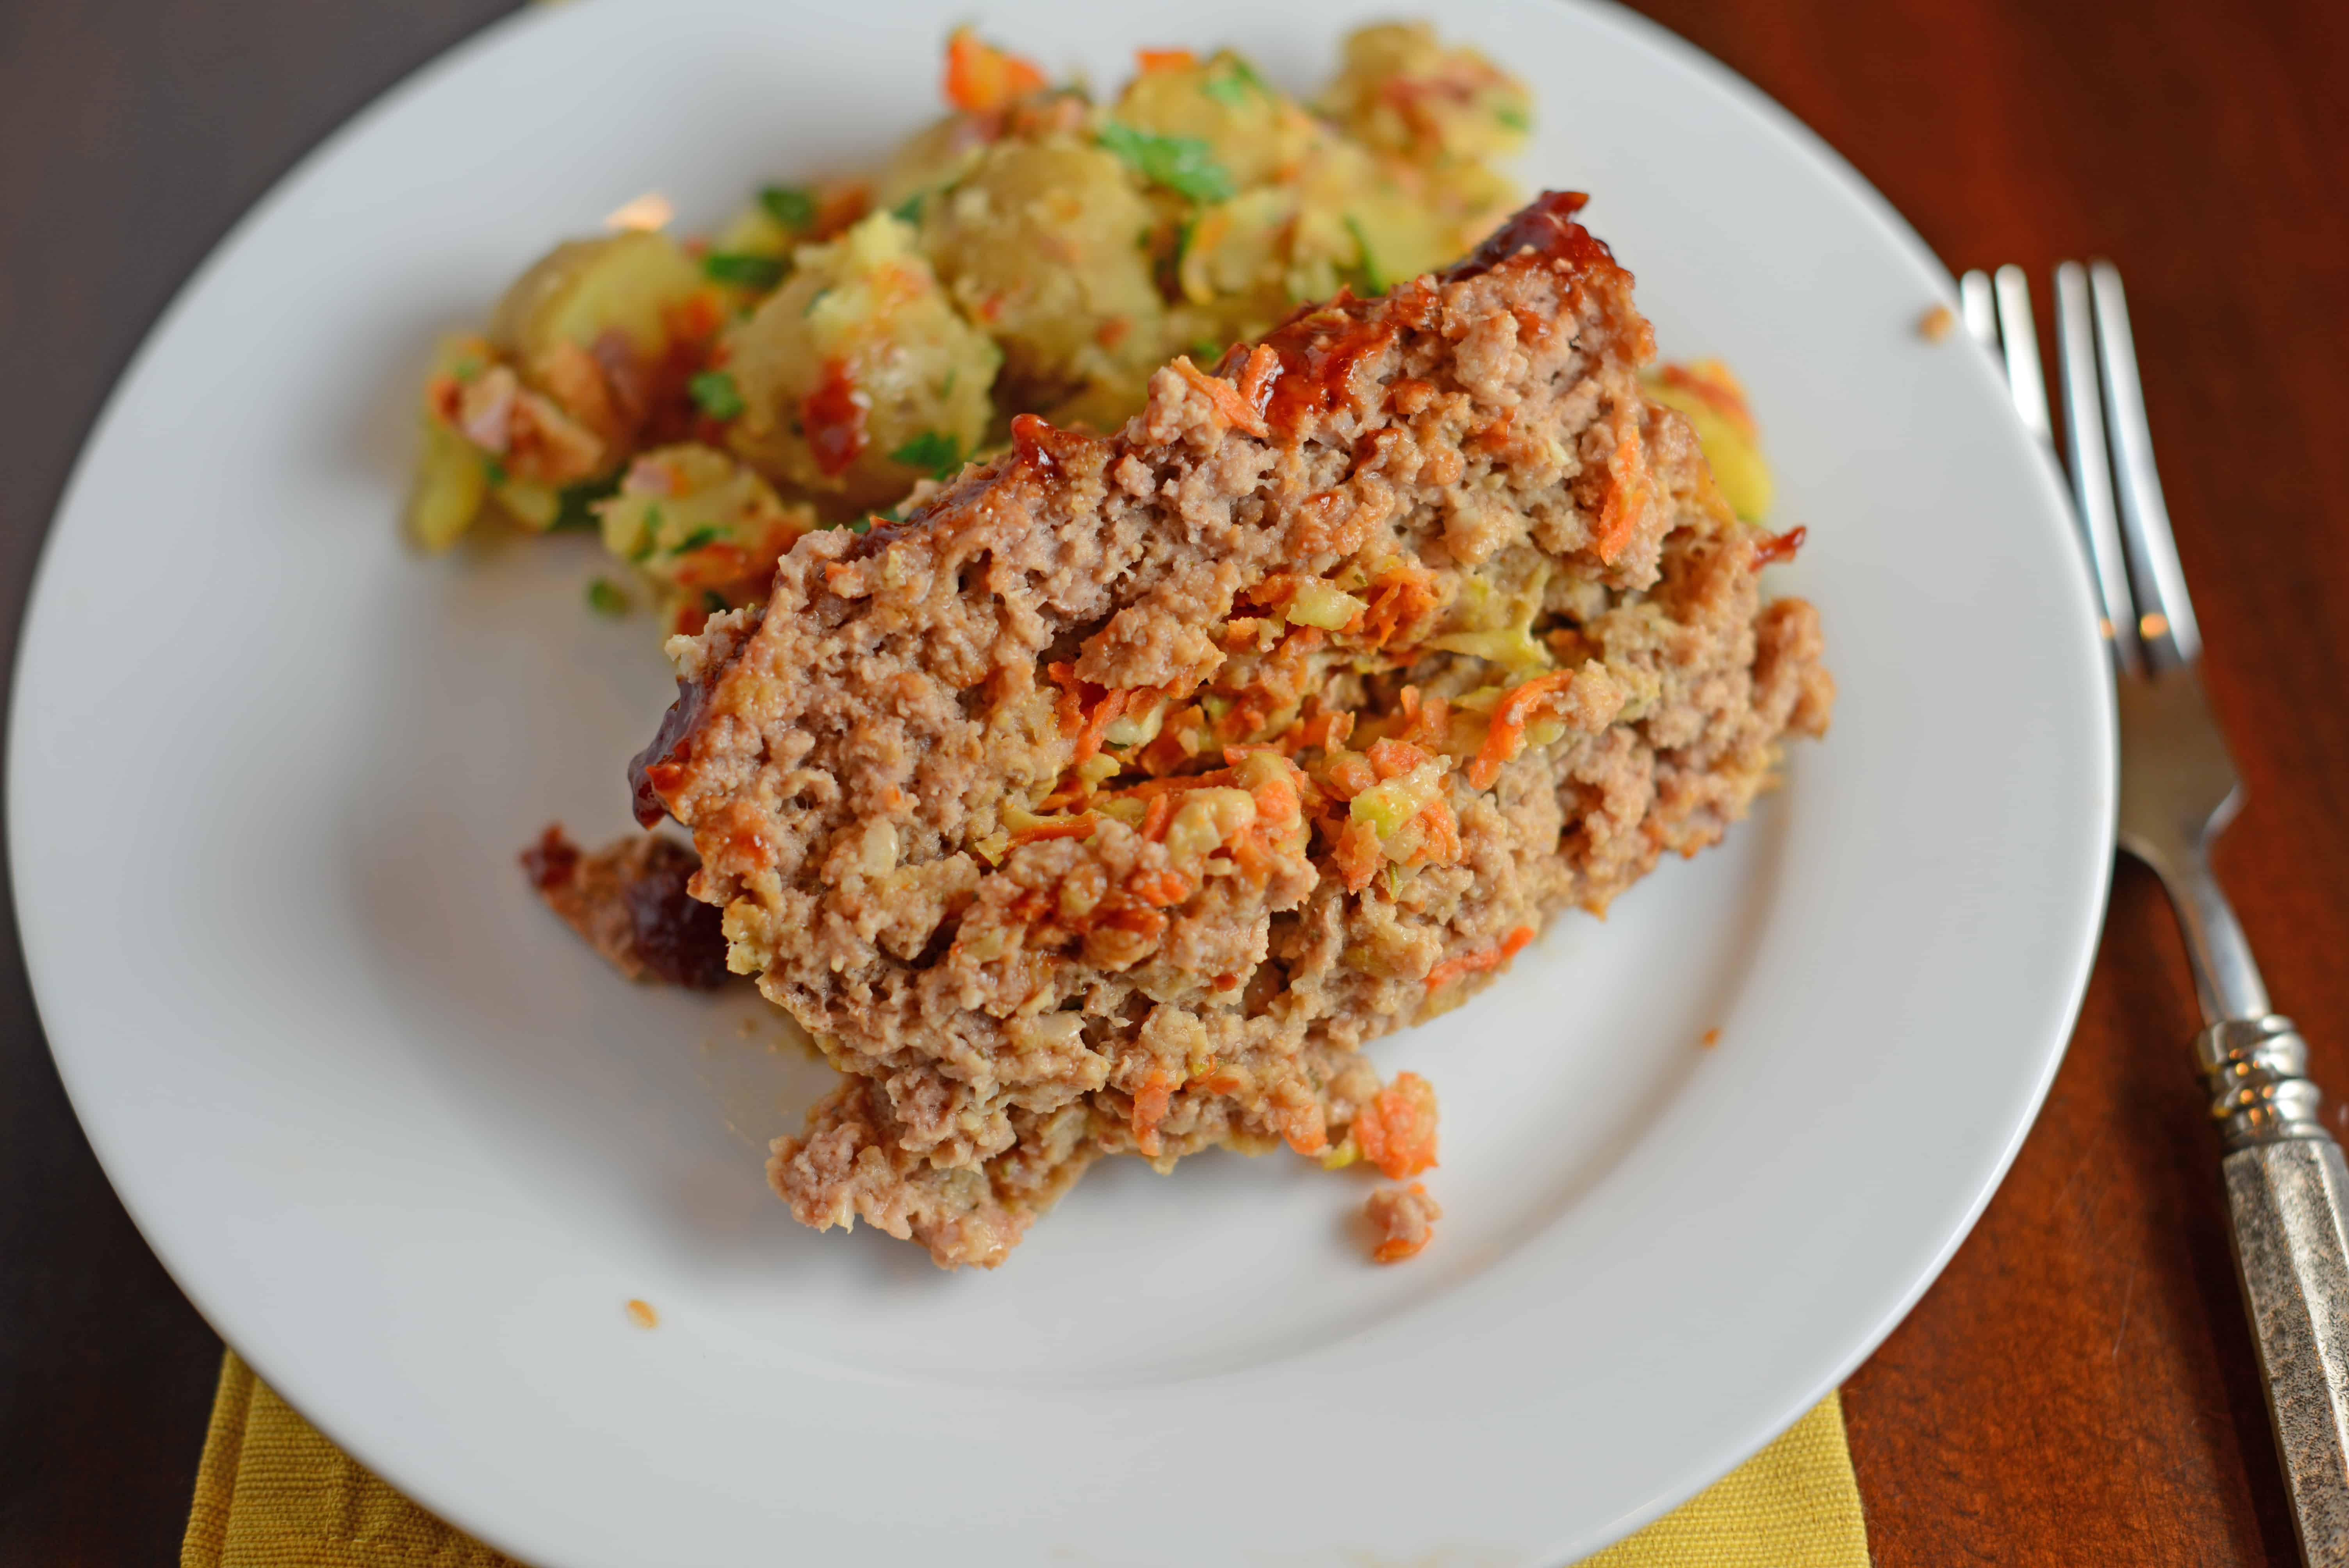 Veggie Stuffed Meatloaf Recipe- The most tender meatloaf ever! Stuffed with carrot and zucchini and topped with a zesty ketchup blend with a special ingredient. Come see what makes this meatloaf one even meatloaf-haters will LOVE! www.savoryexperiments.com